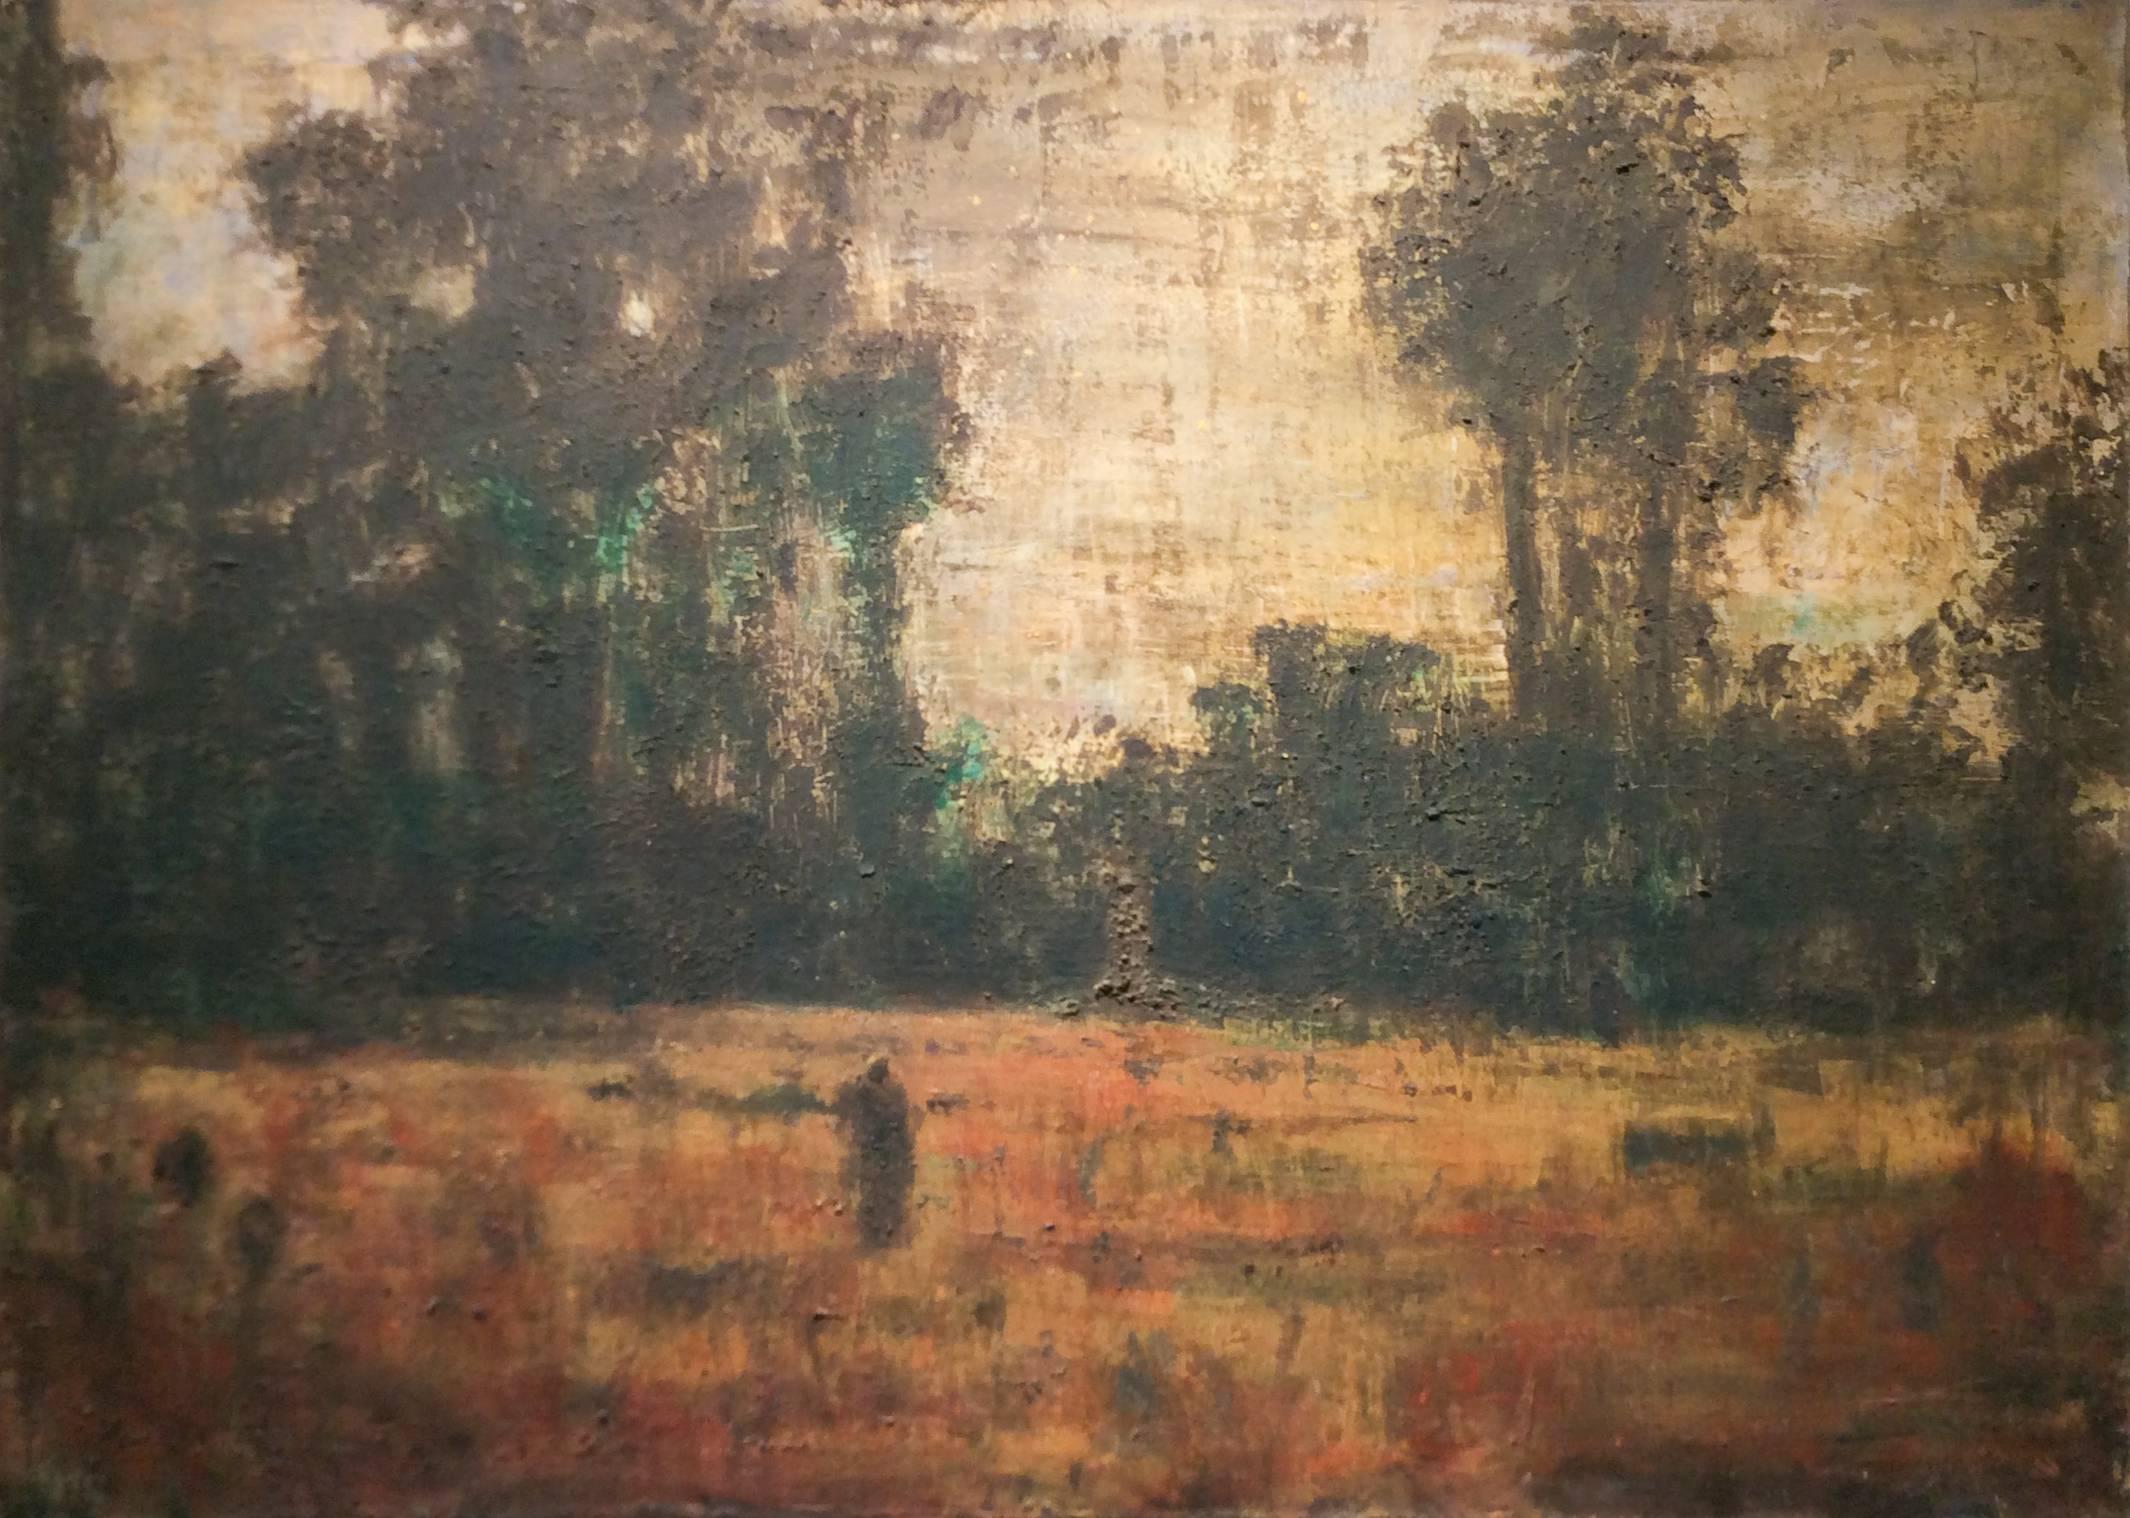 Figure in a Field: Abstract Mixed Media Landscape on Canvas